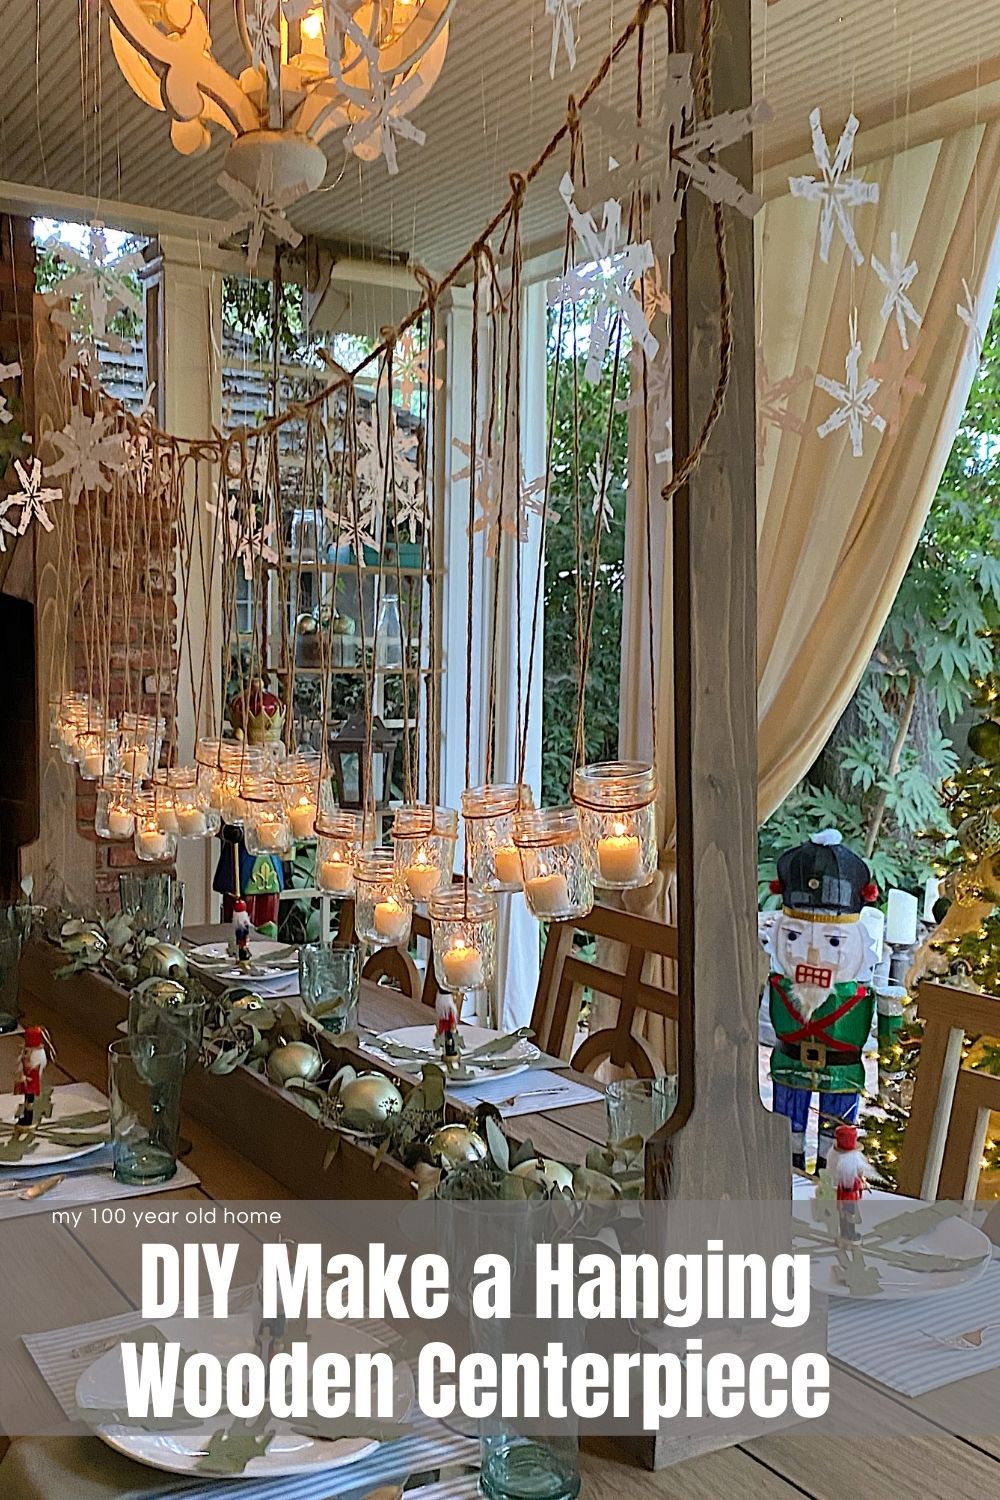 I am thrilled that my Nutcracker themed Christmas dinner is featured on the Home Depot Blog. I loved creating this dining space and hope you will enjoy my ideas for Christmas dinner.